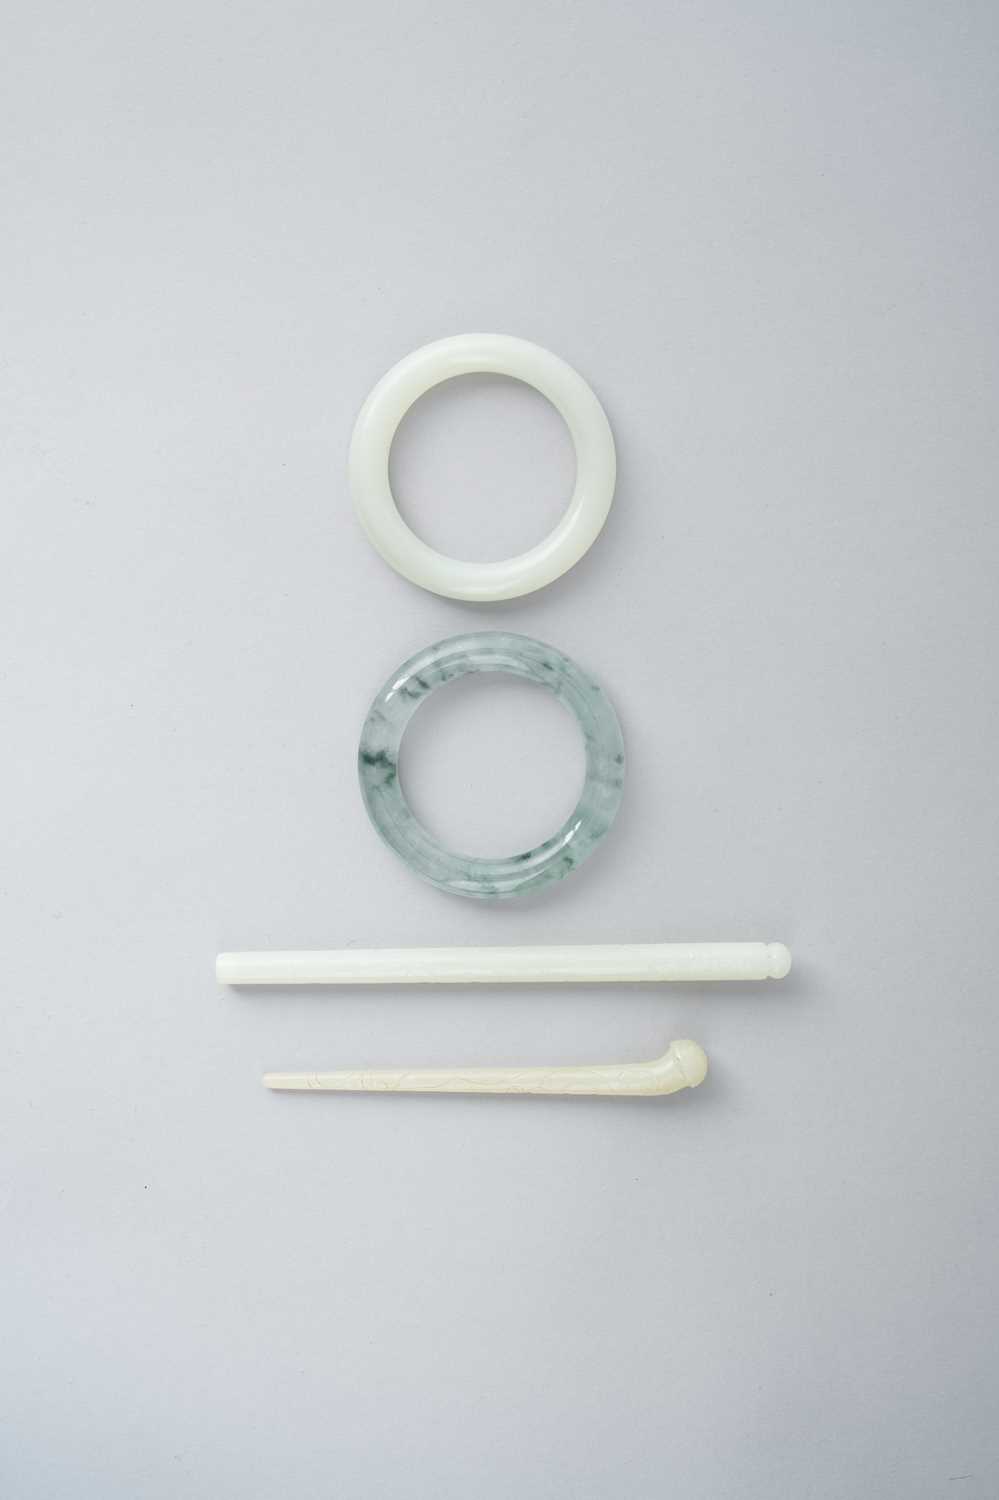 FOUR CHINESE JADE ITEMS QING DYNASTY OR LATER Comprising: a white jade bangle; a white jade brush